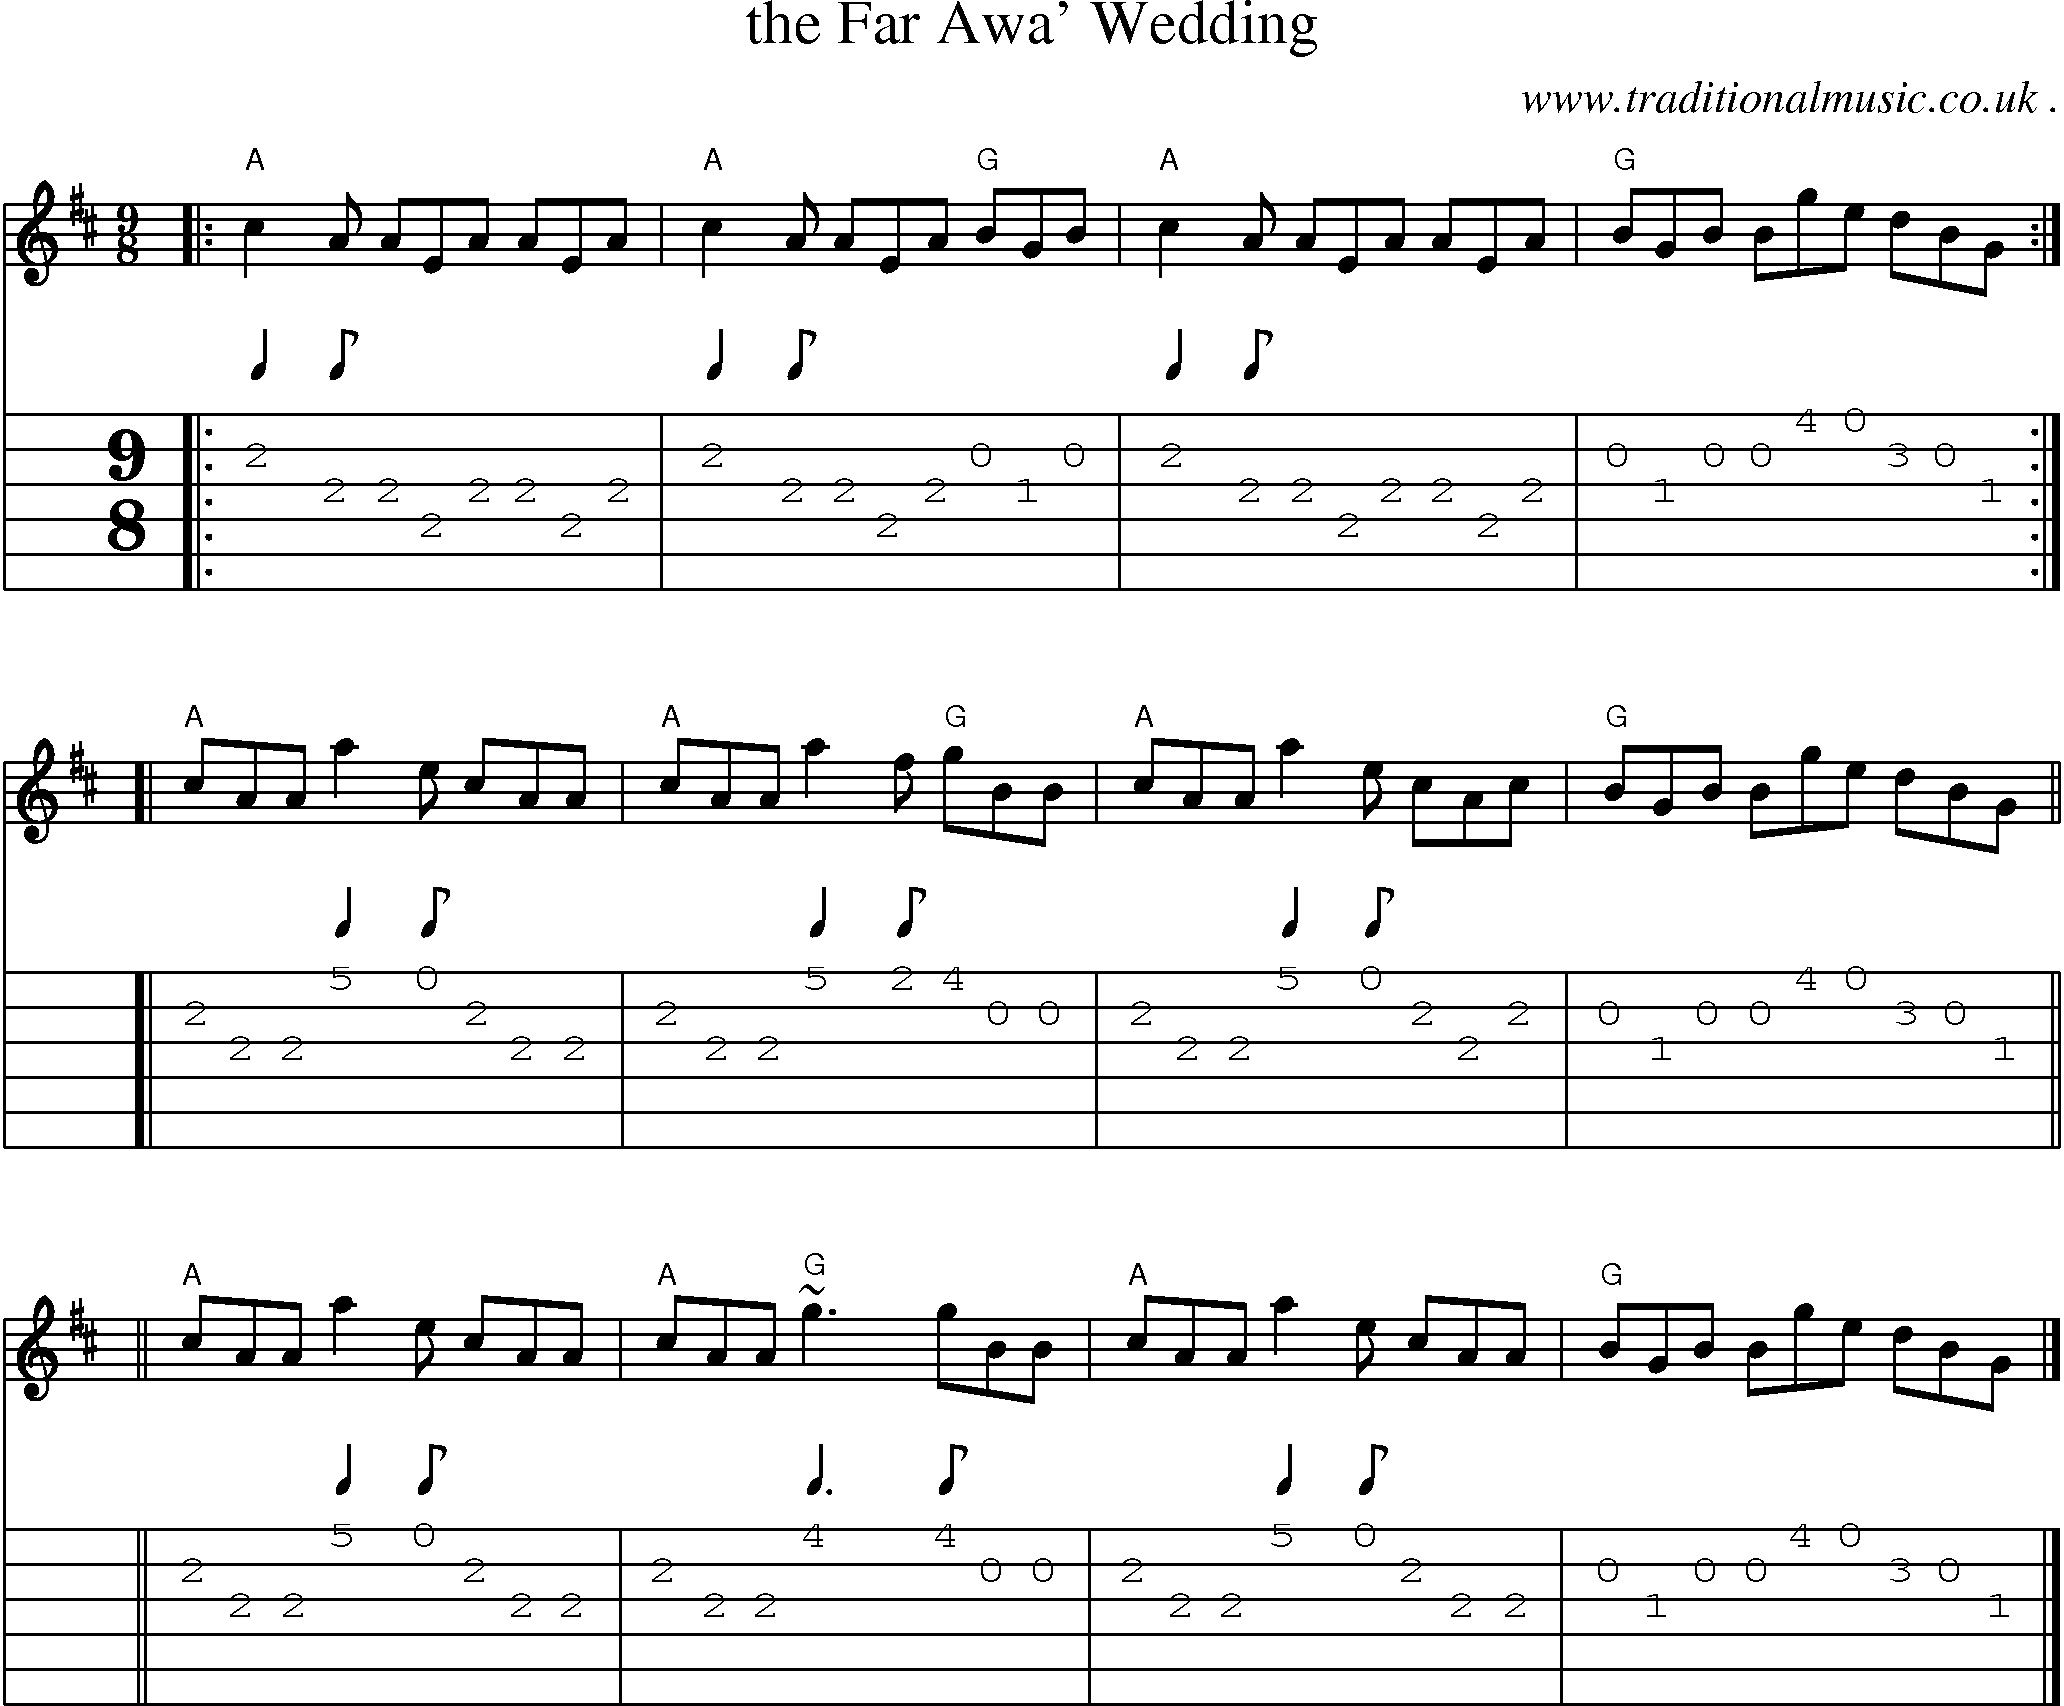 Sheet-music  score, Chords and Guitar Tabs for The Far Awa Wedding